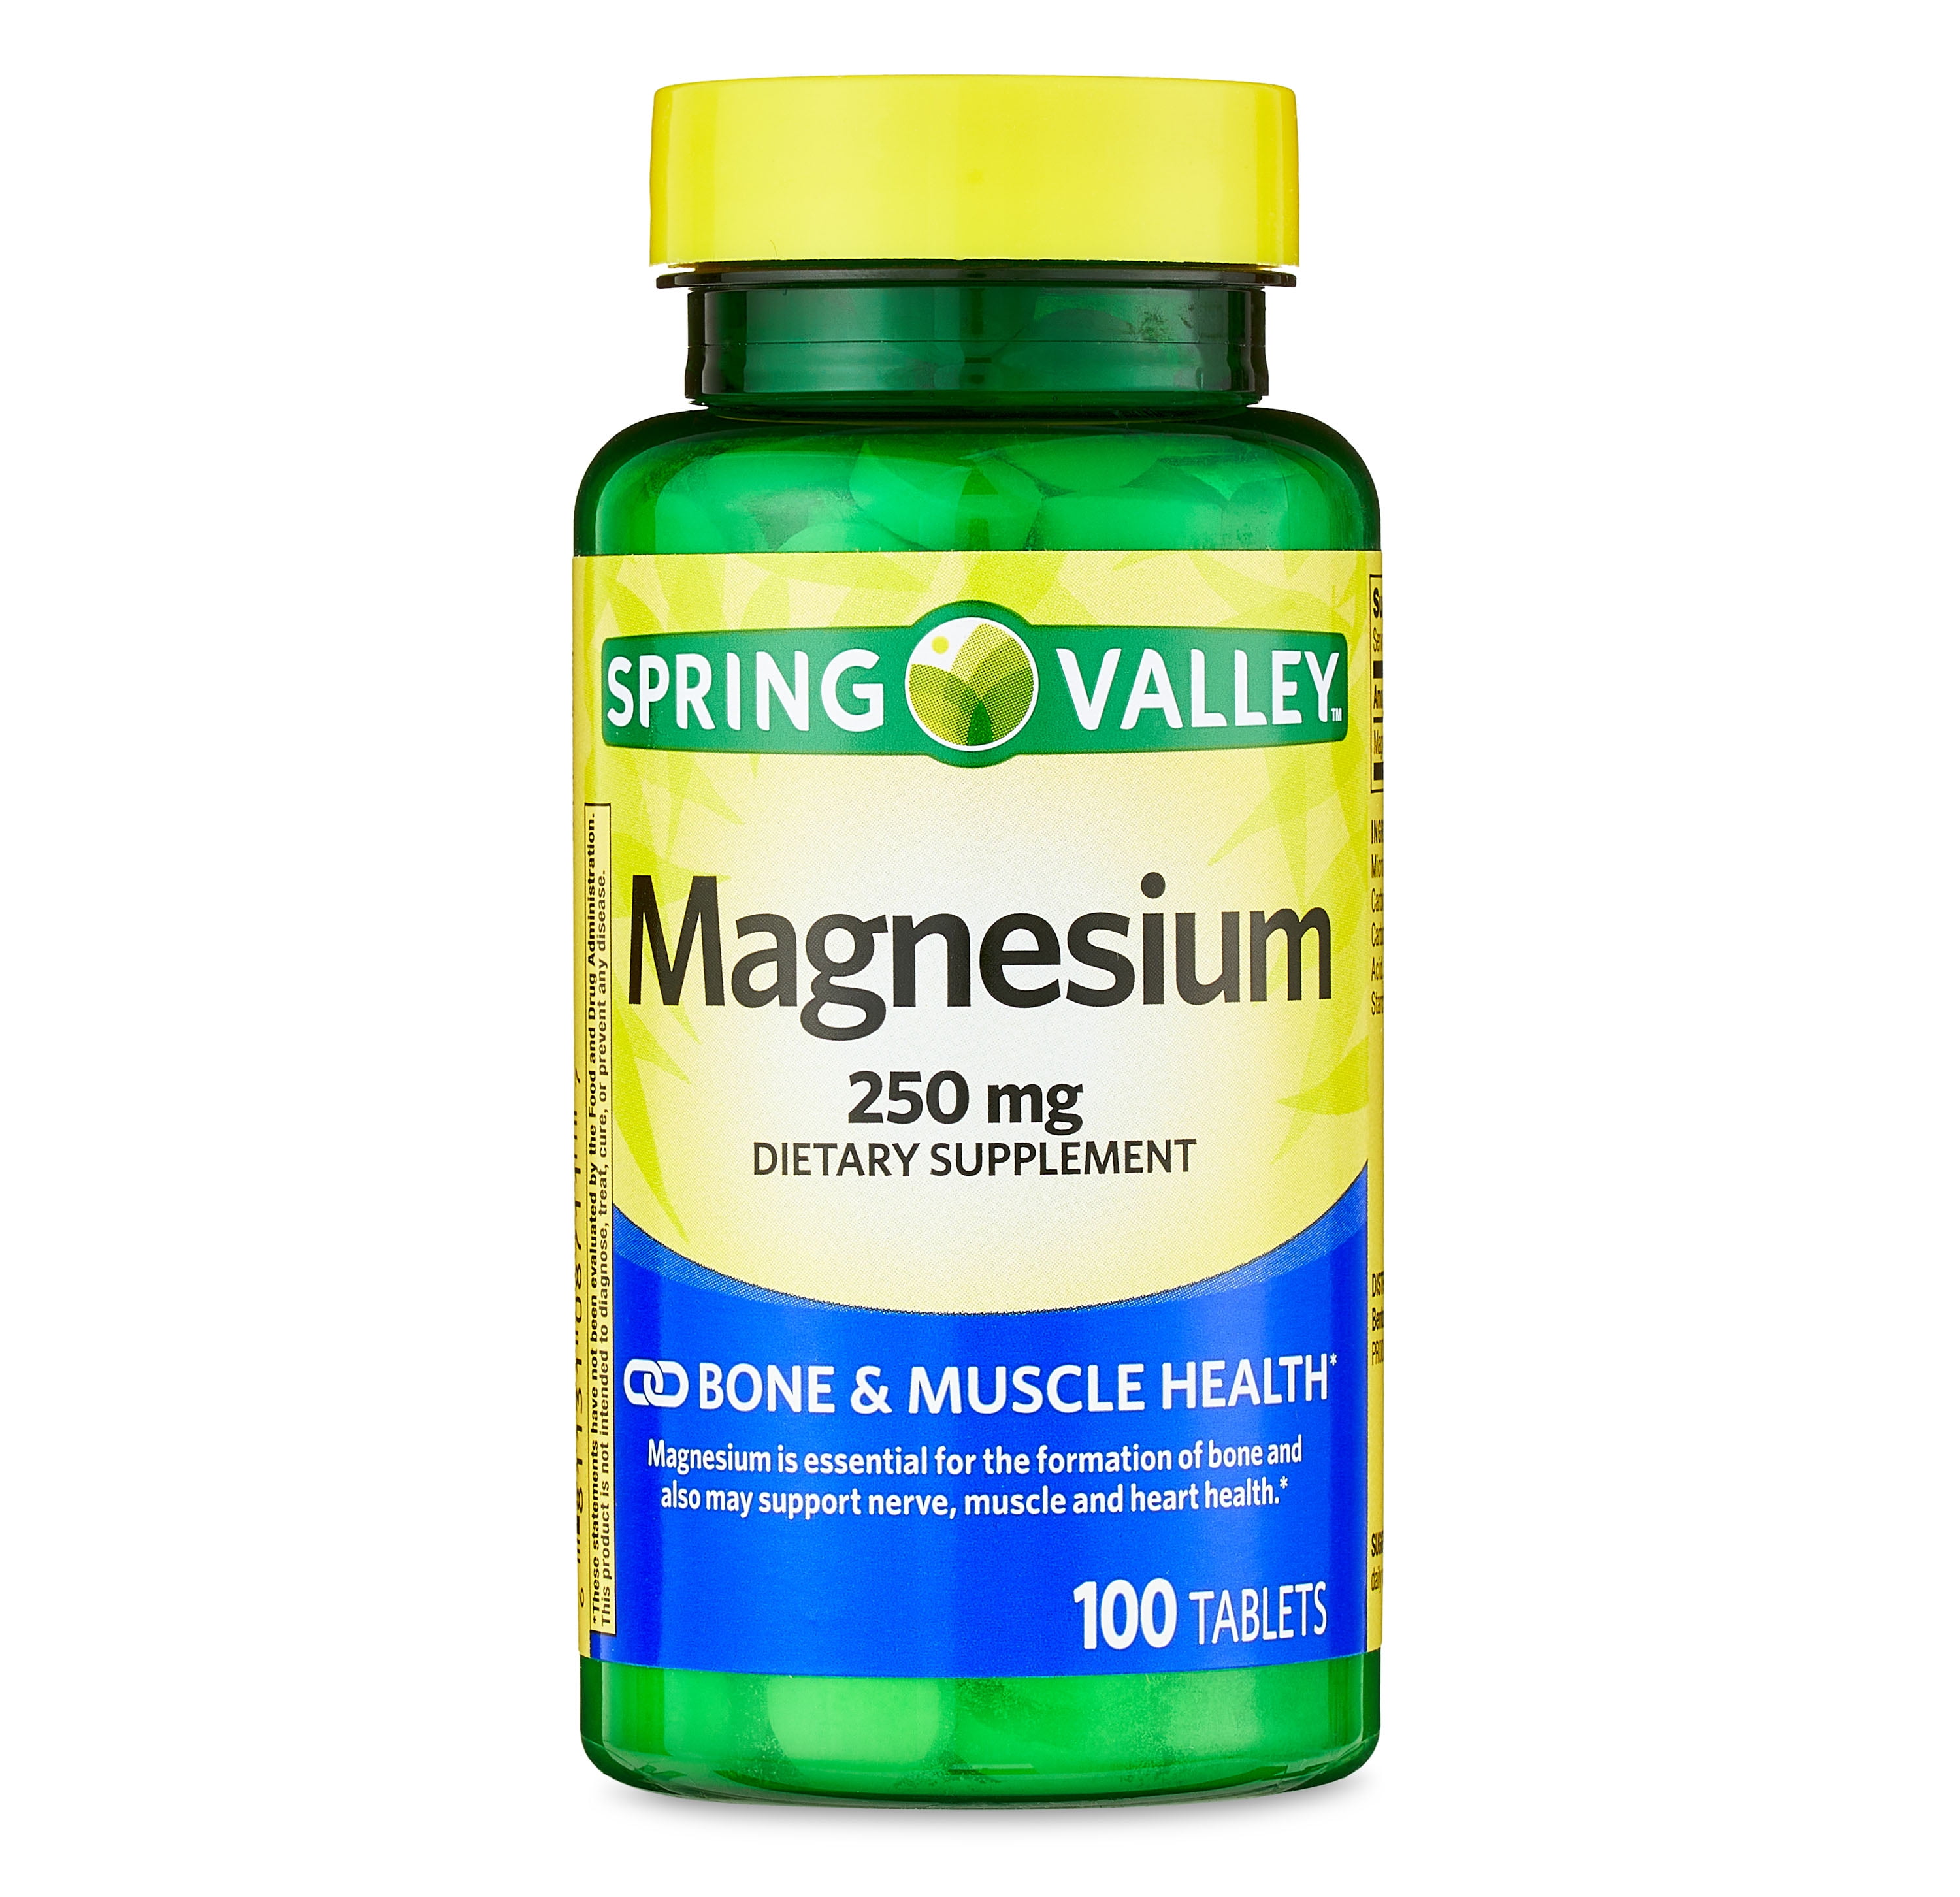 Spring Valley Magnesium Tablets Dietary Supplement, 250 mg, 100 Count